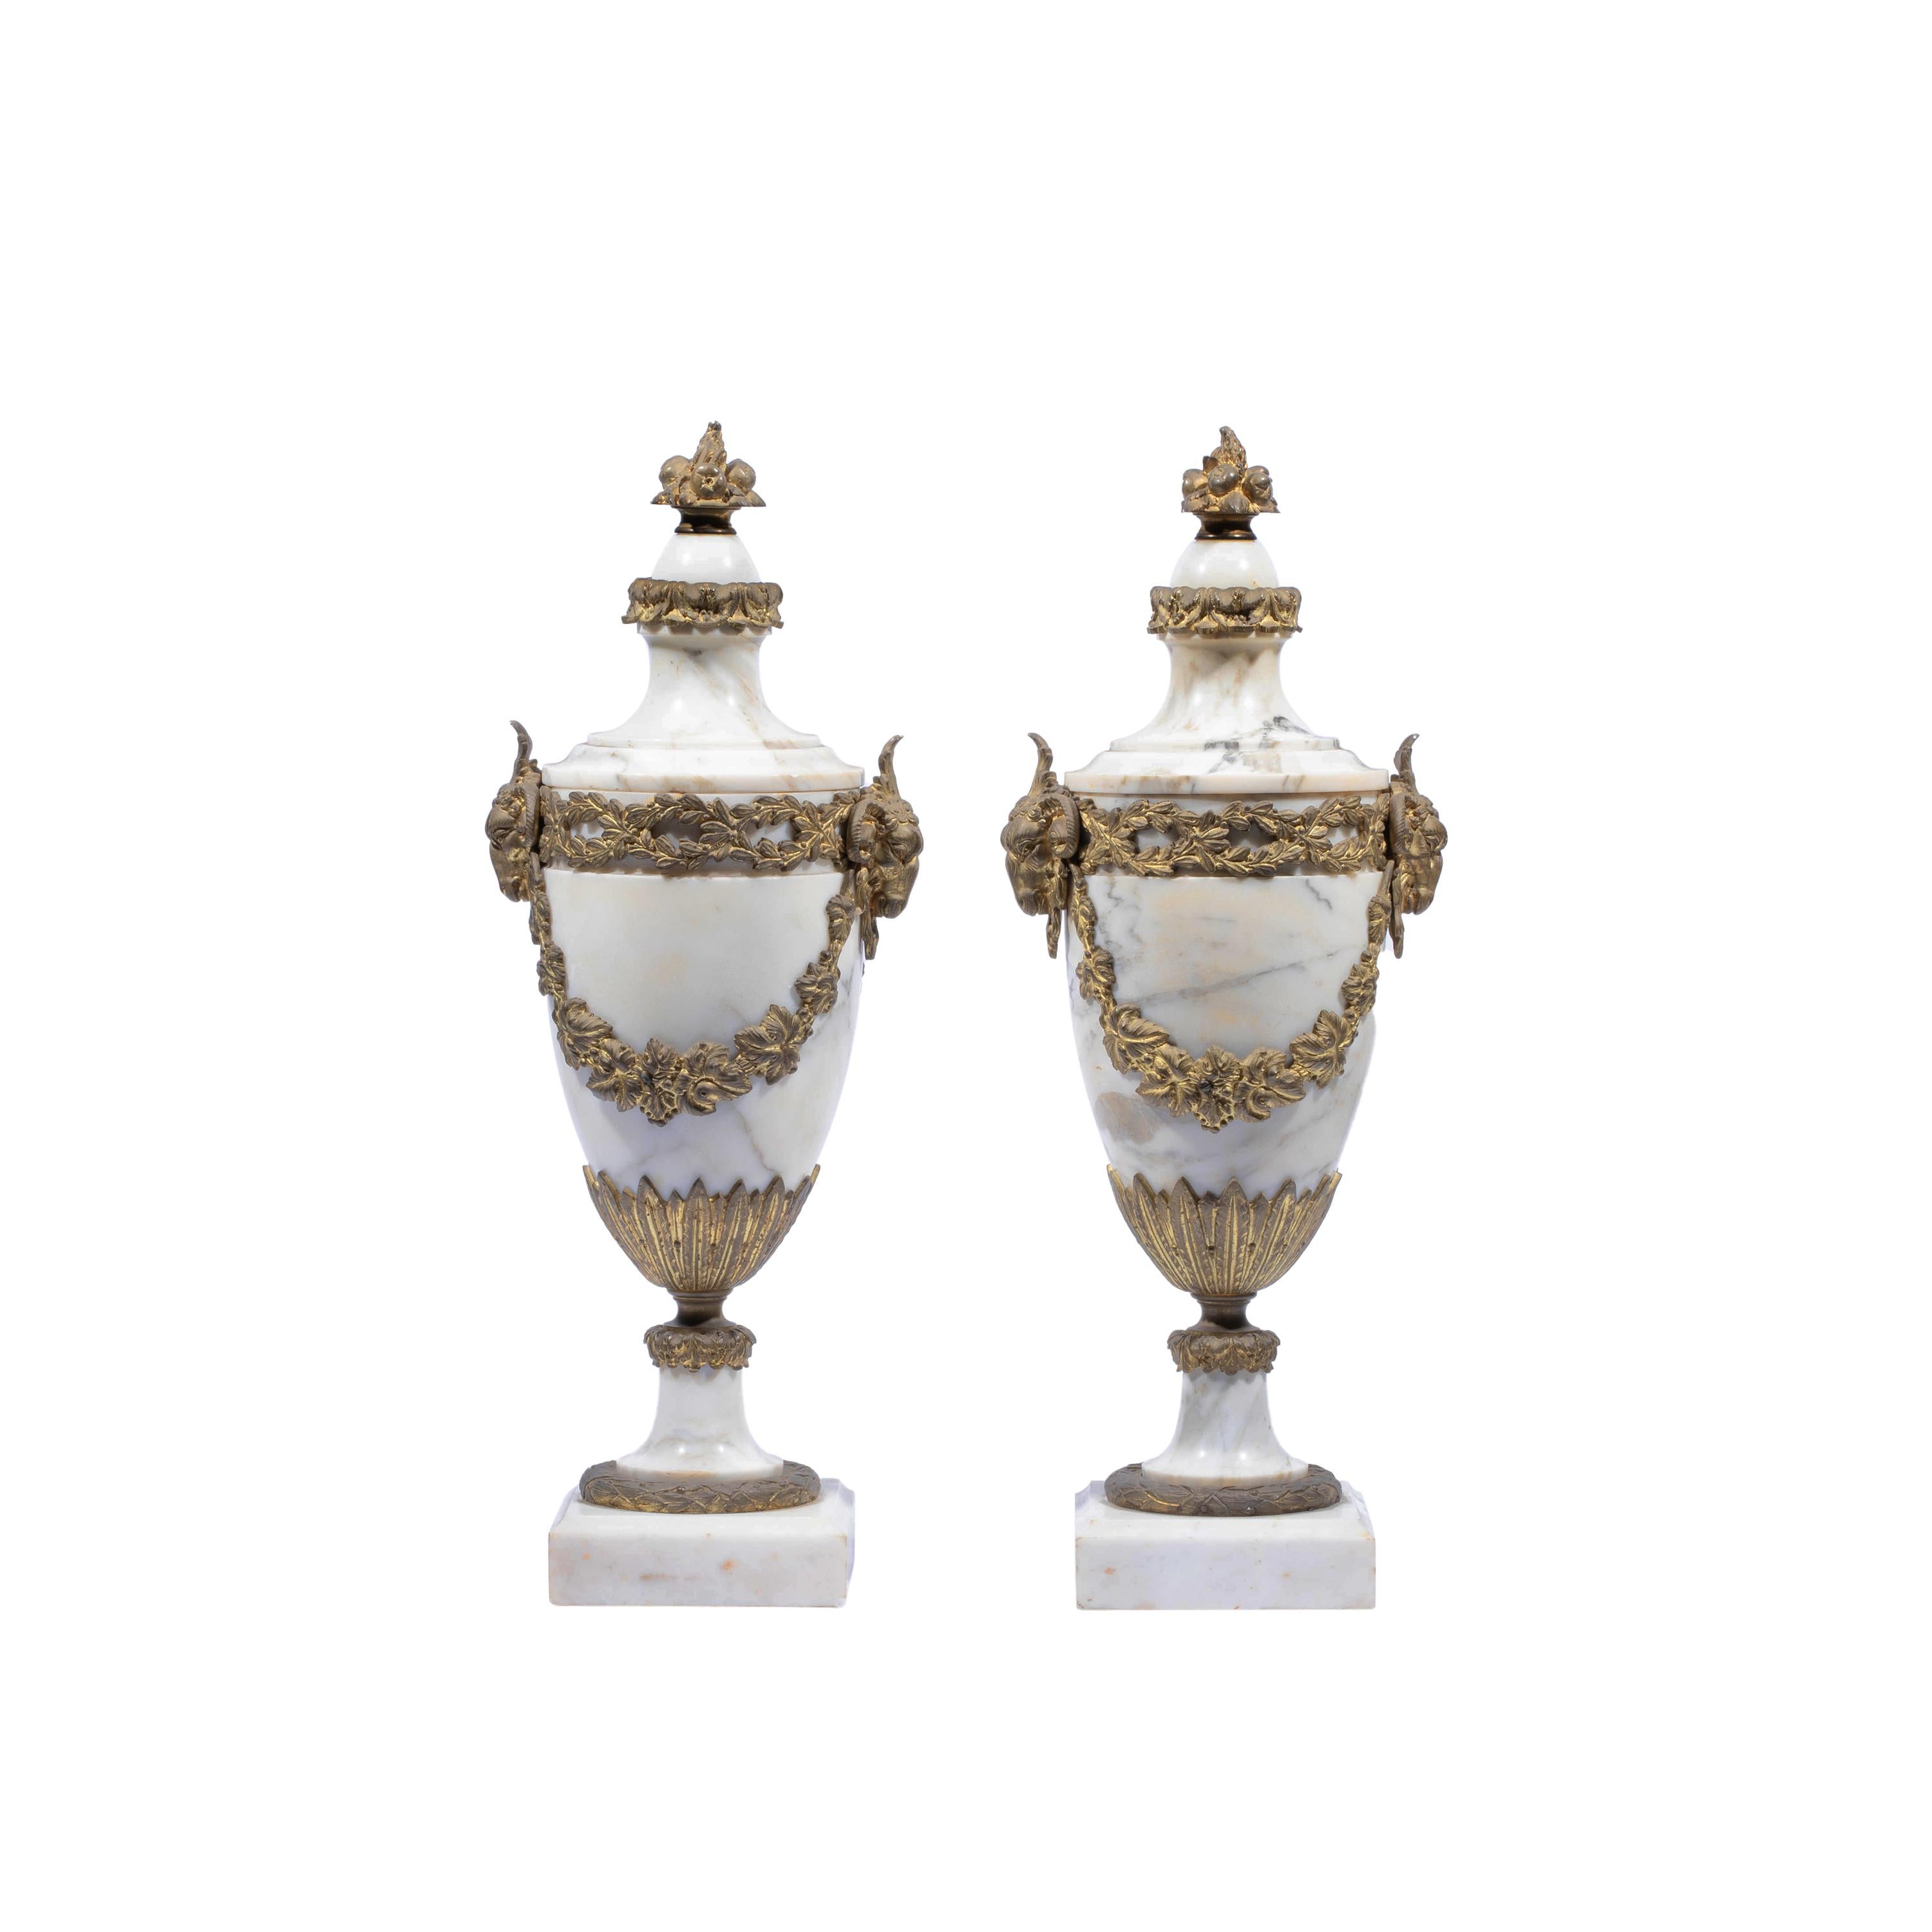 Pair of French Ormolu Mounted White Marble Vases, Circa 1900
Having ormolu mounts with rams head on either side if each urn shaped vase.